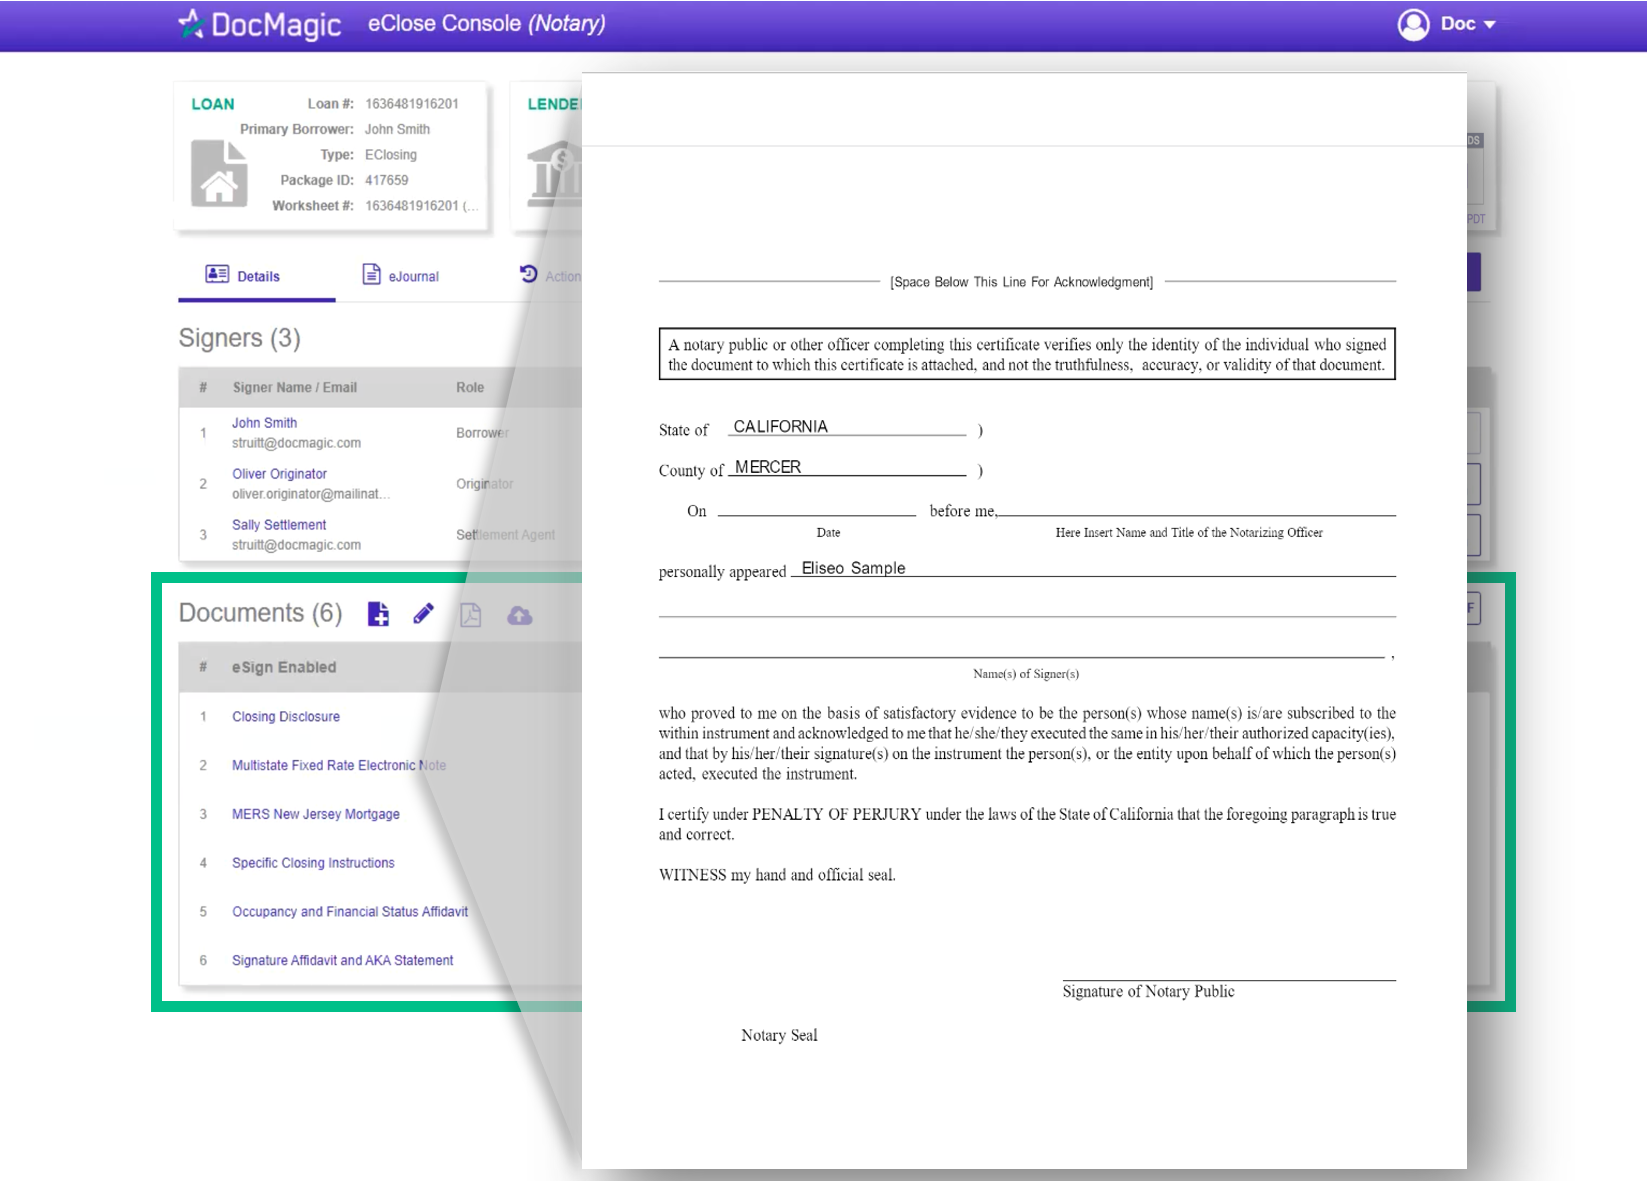 Screenshot of the Notary eClose Console Documents